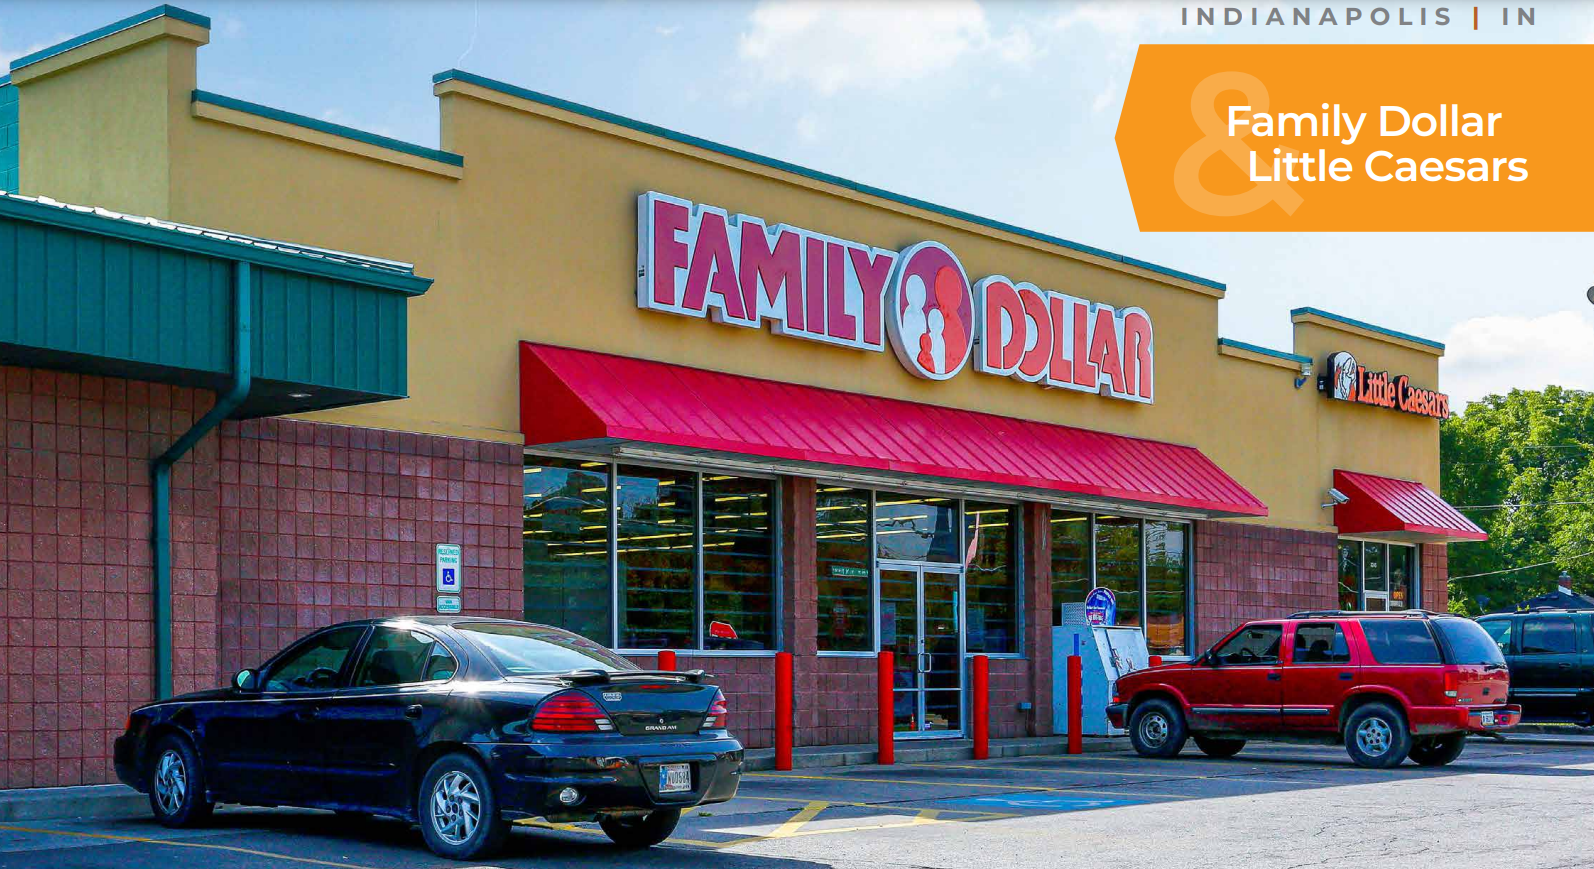 Family Dollar & Little Caesars – Indianapolis, IN